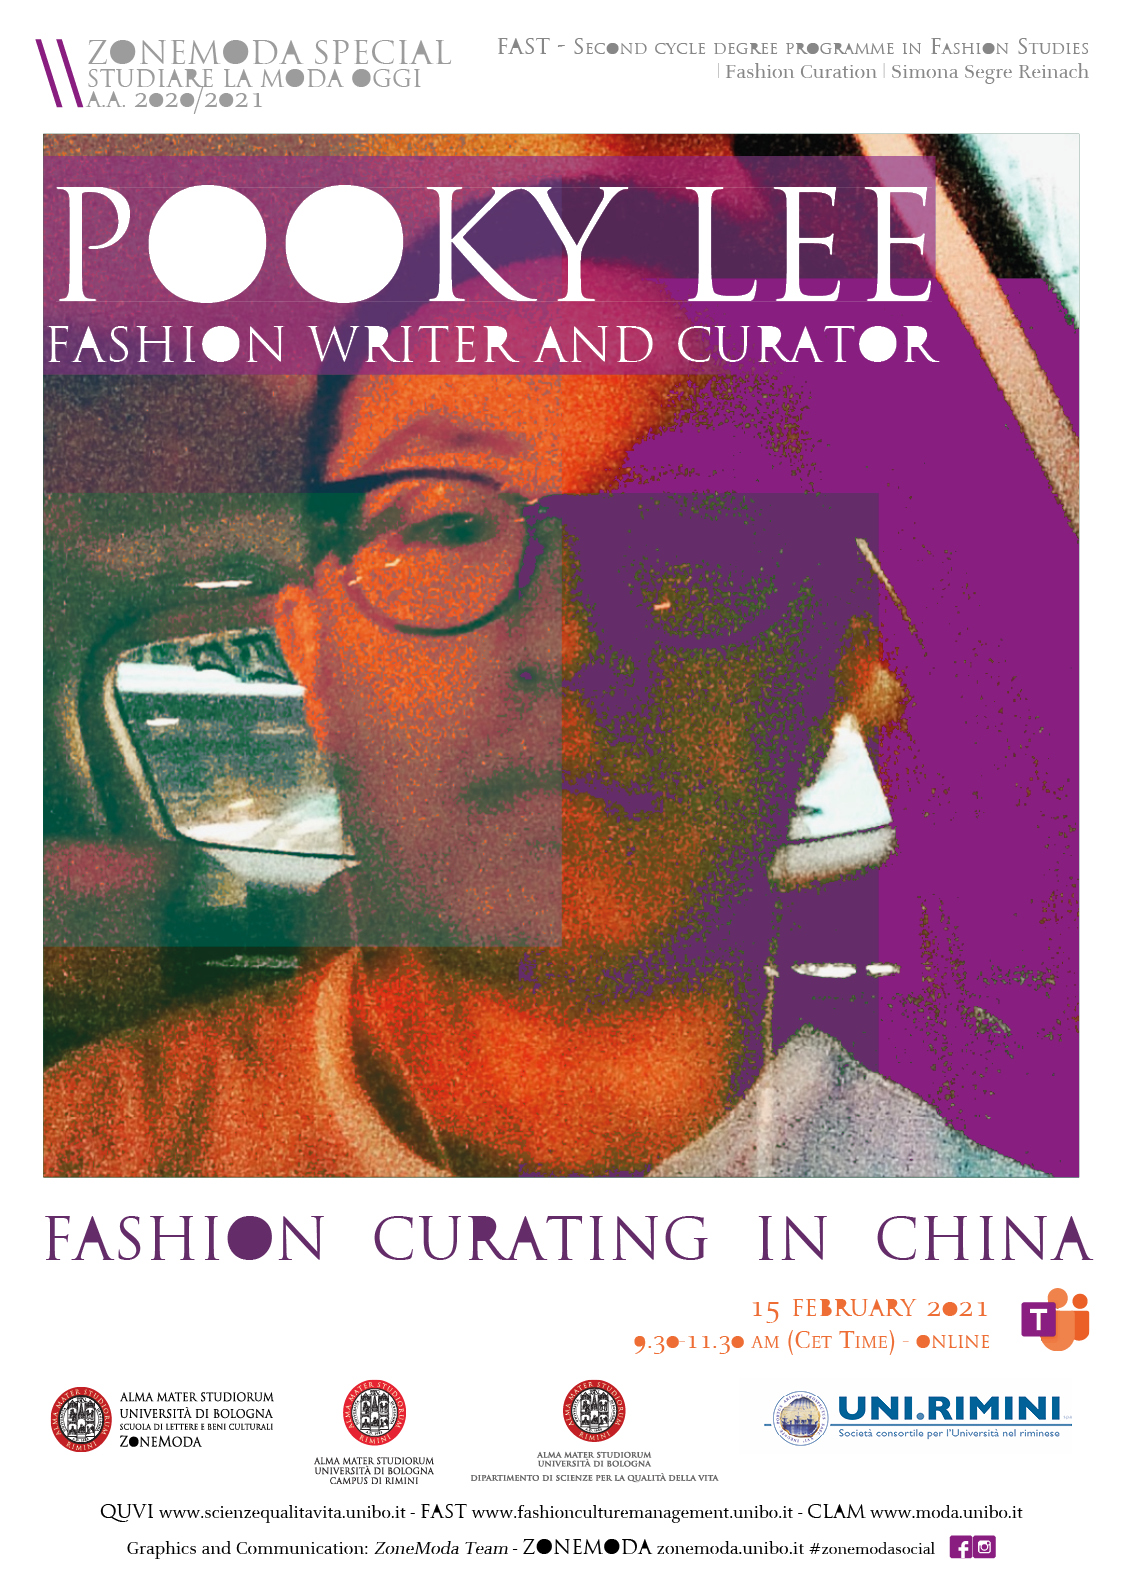 Pooky Lee. Fashion writer and curator. Fashion Curating in China